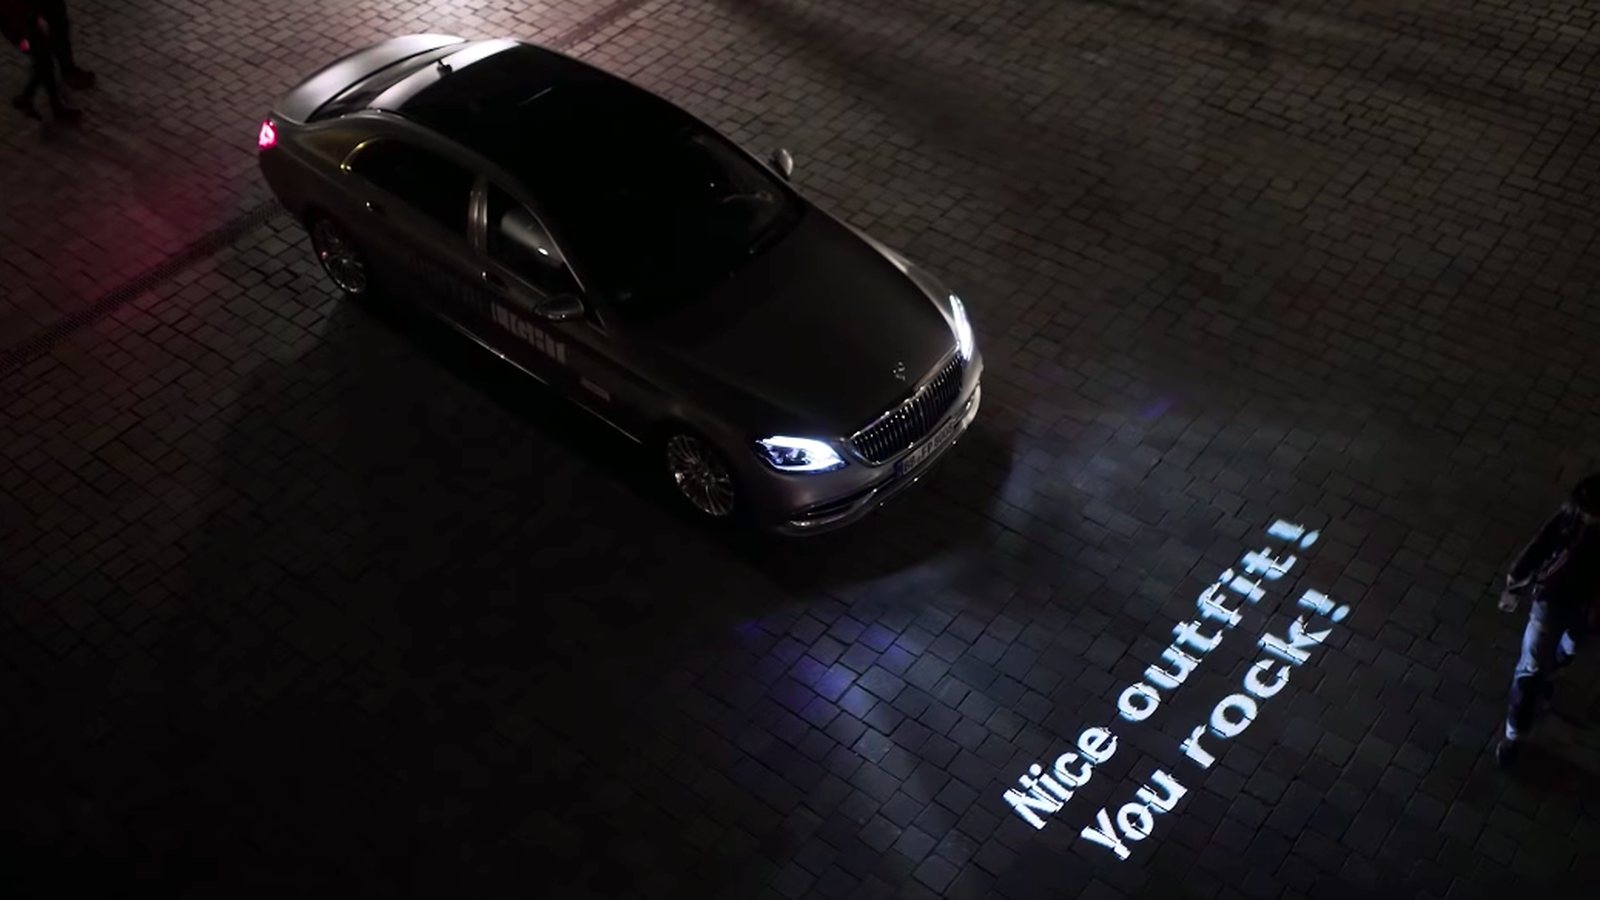 New Mercedes S Class Headlights Can Actually Spell Out Messages